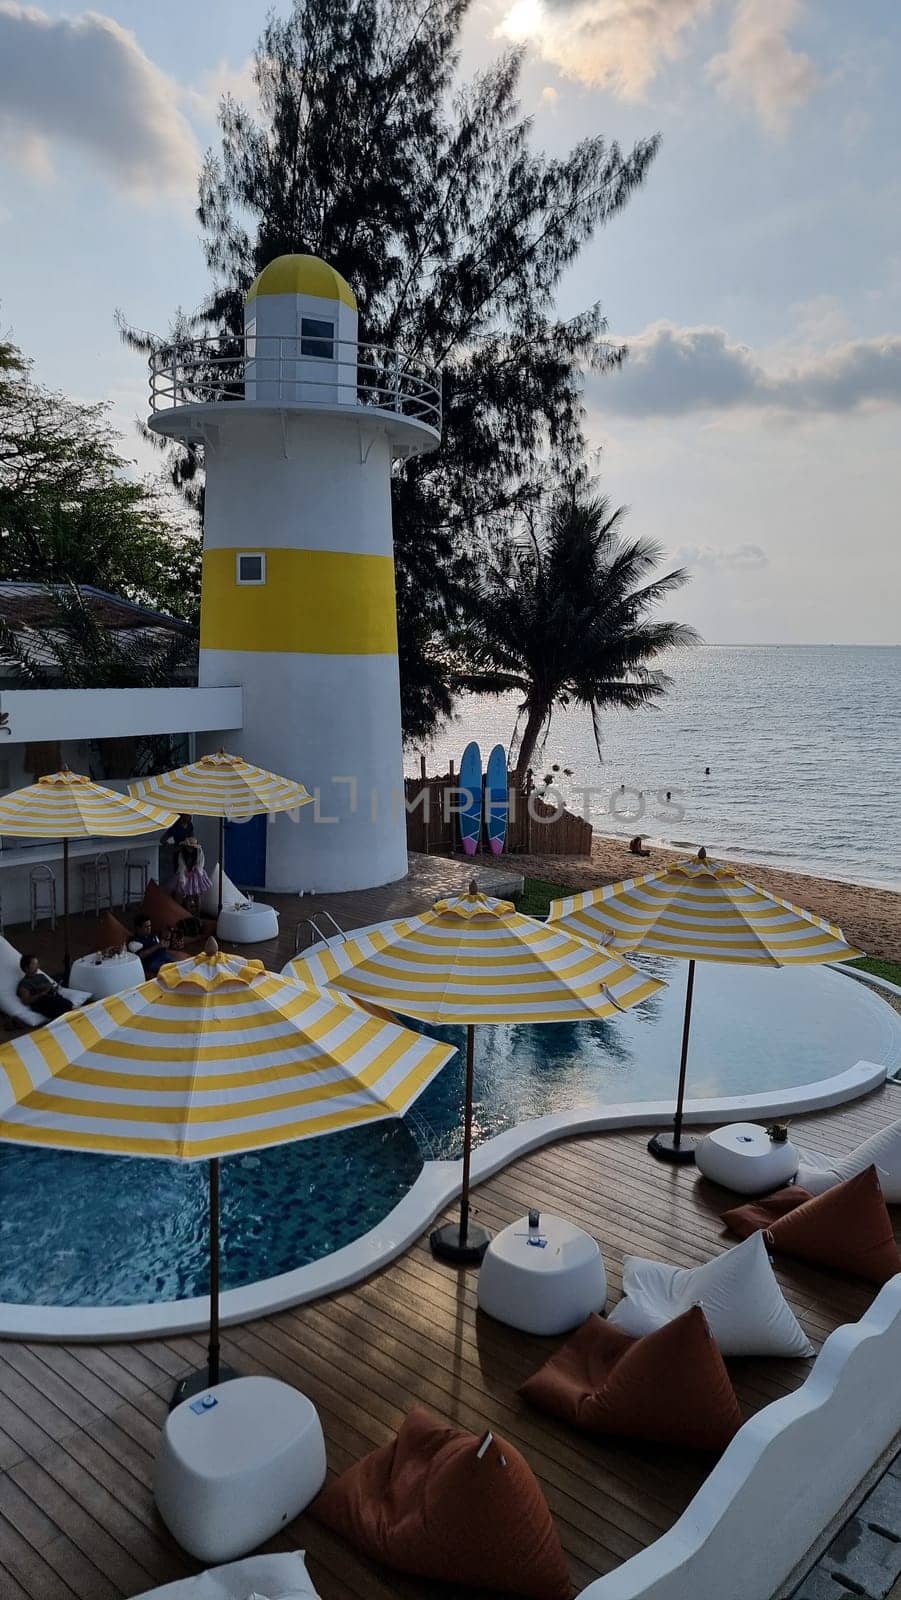 Bangsaray Pattaya Thailand 28 February 2024, Relax by the pool with colorful umbrellas, while gazing at the striking lighthouse in the distance against a clear blue sky.